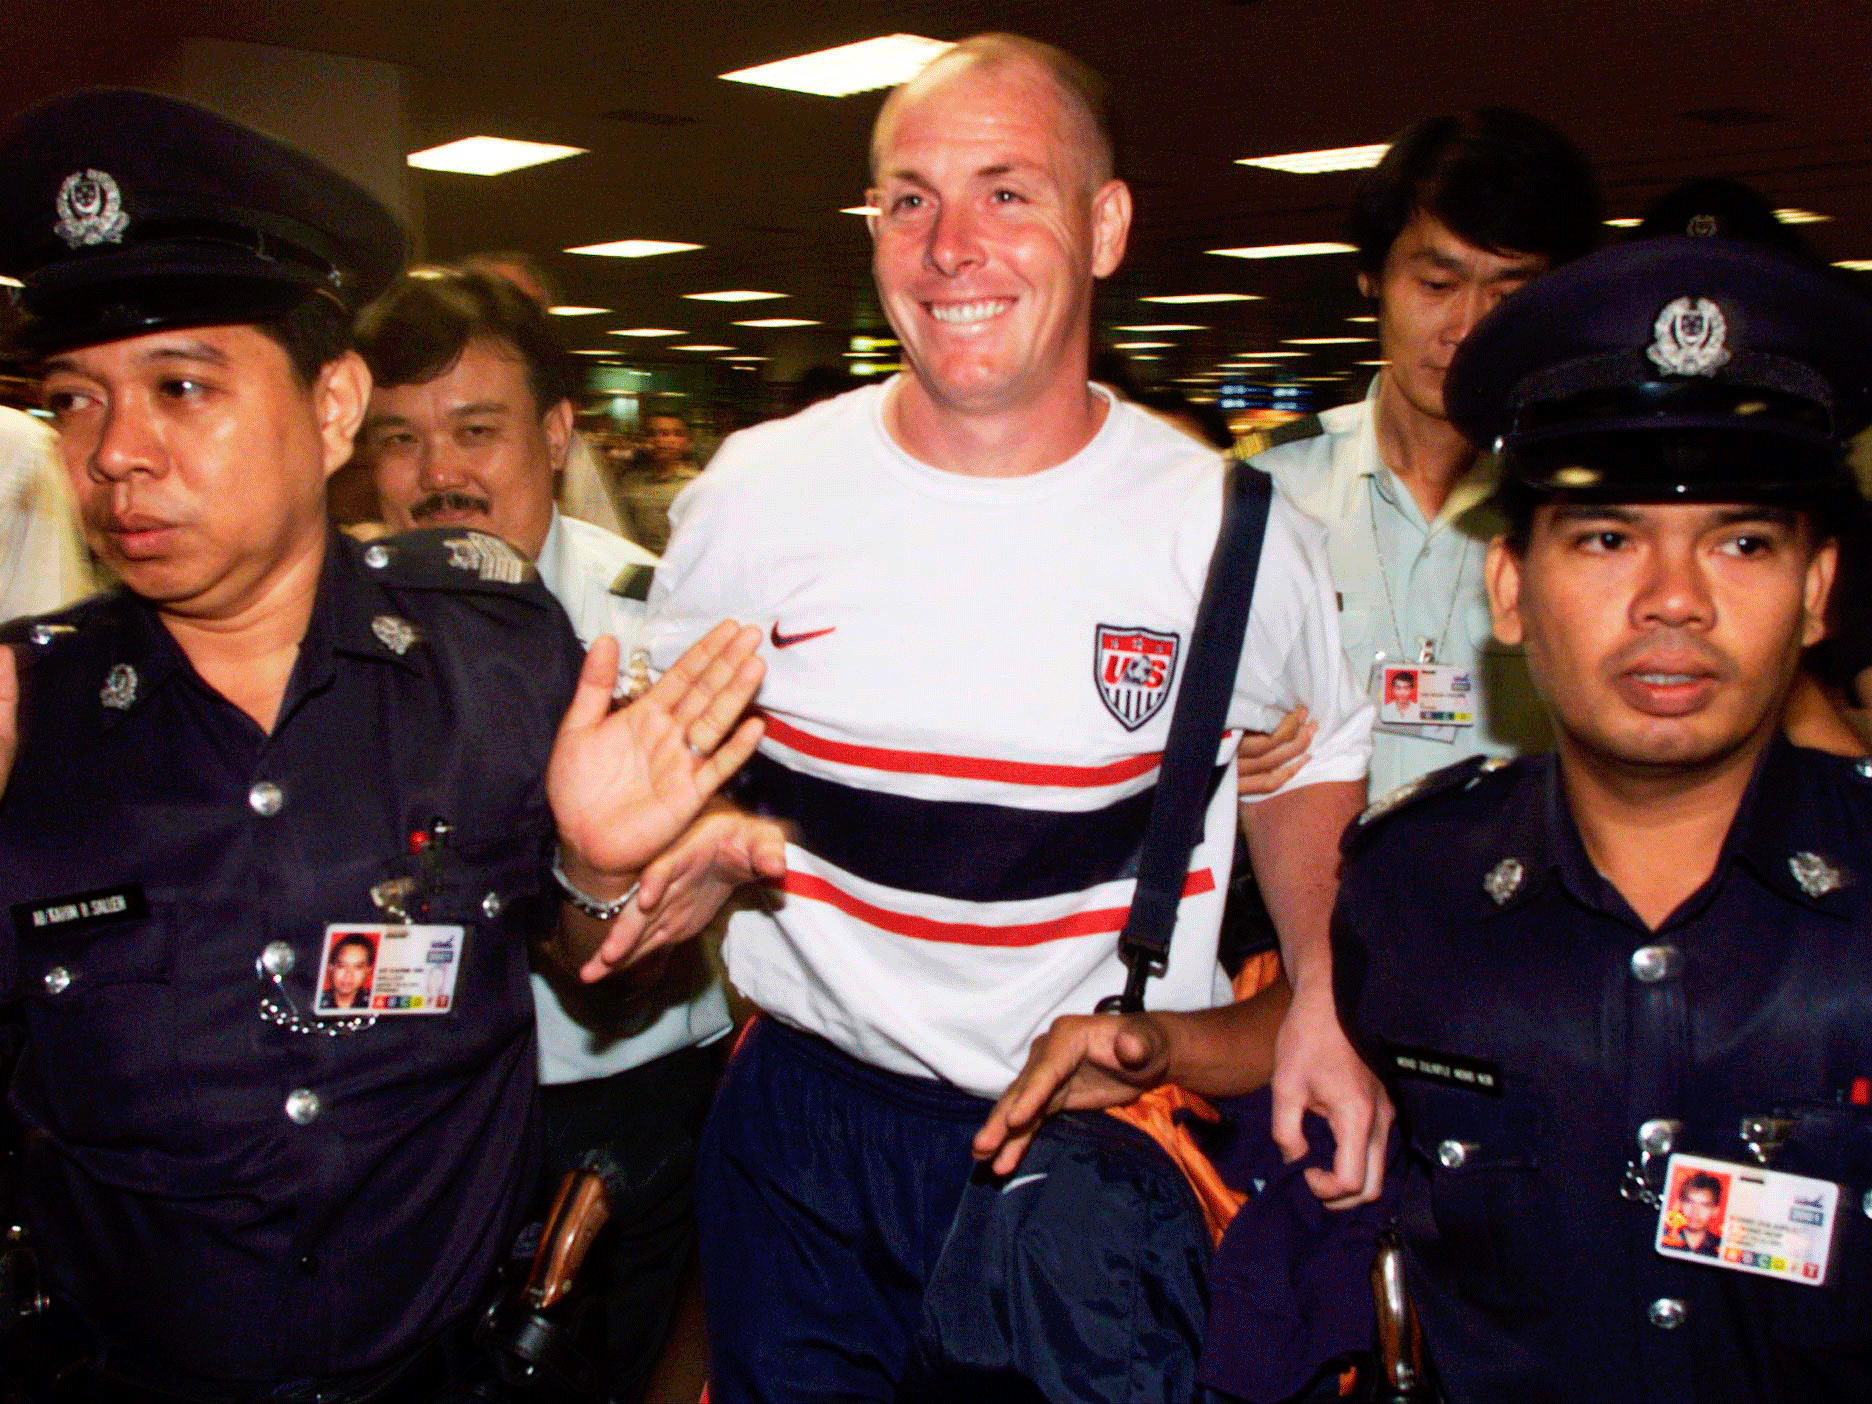 Leeson was arrested in 1995 in Frankfurt and was extradited back to Singapore